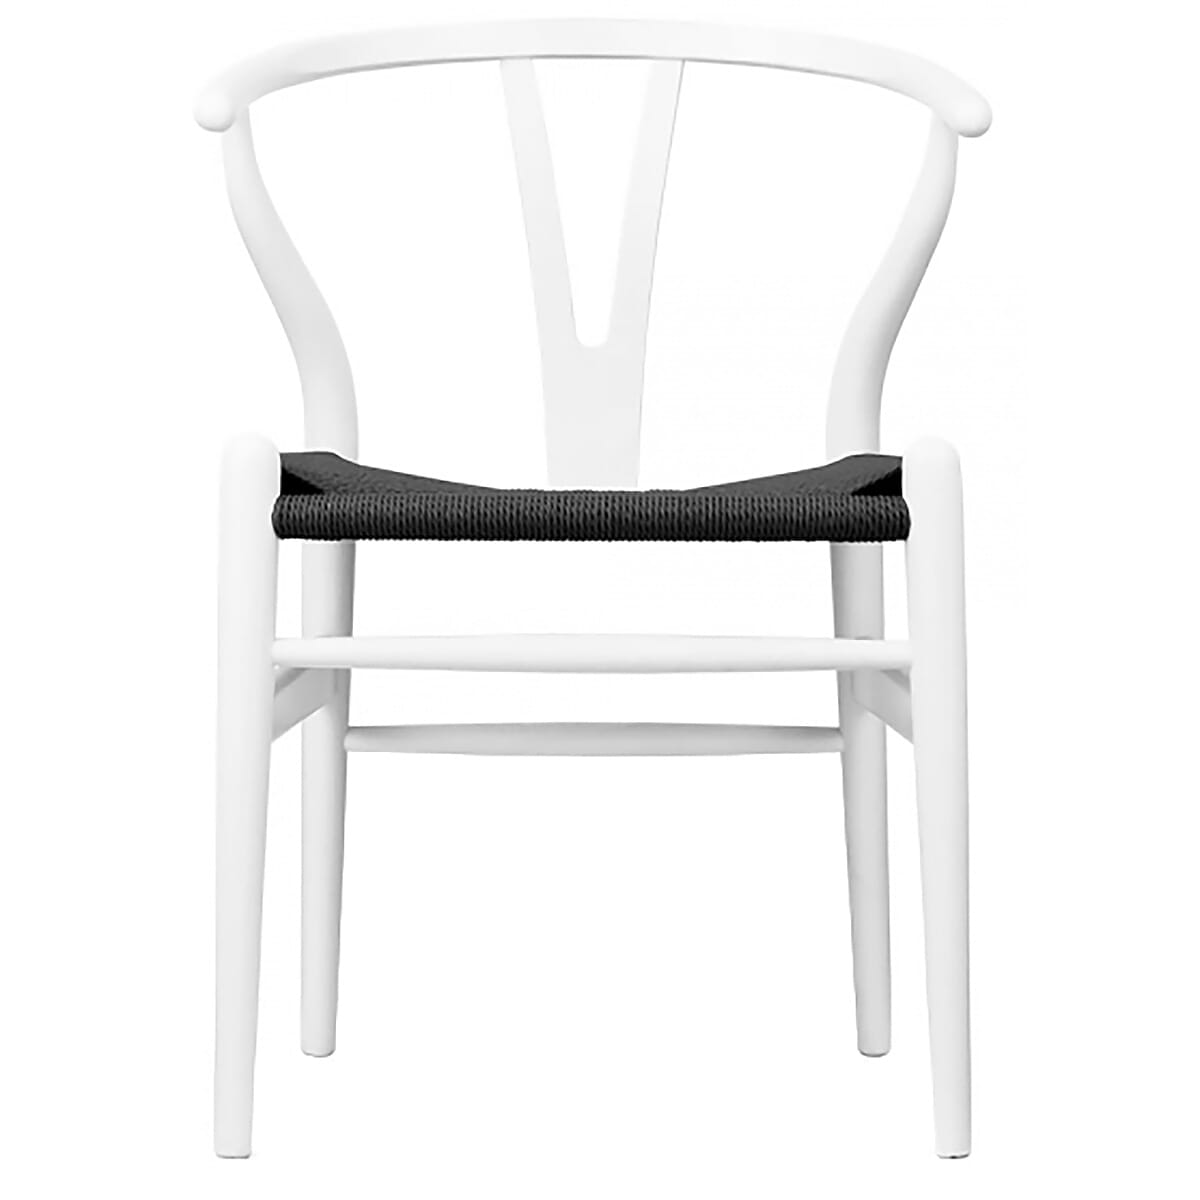 Shop Beautiful Hans Wegner Chairs with Free Delivery | Swivel UK